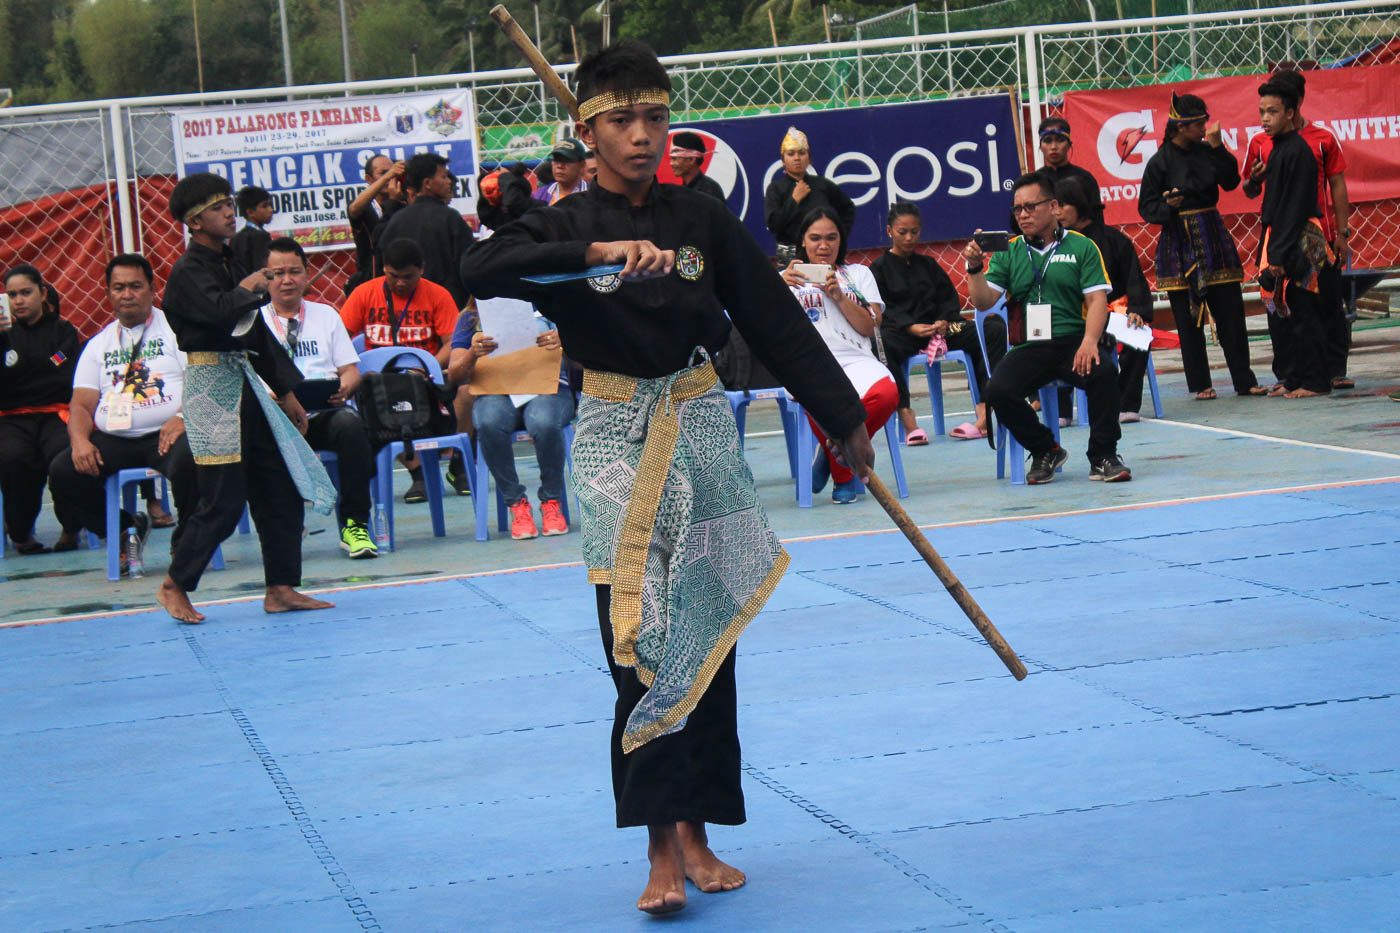 END OF ROUND. A Pencak Silat competitor is equipped with Pisau and Toya.  